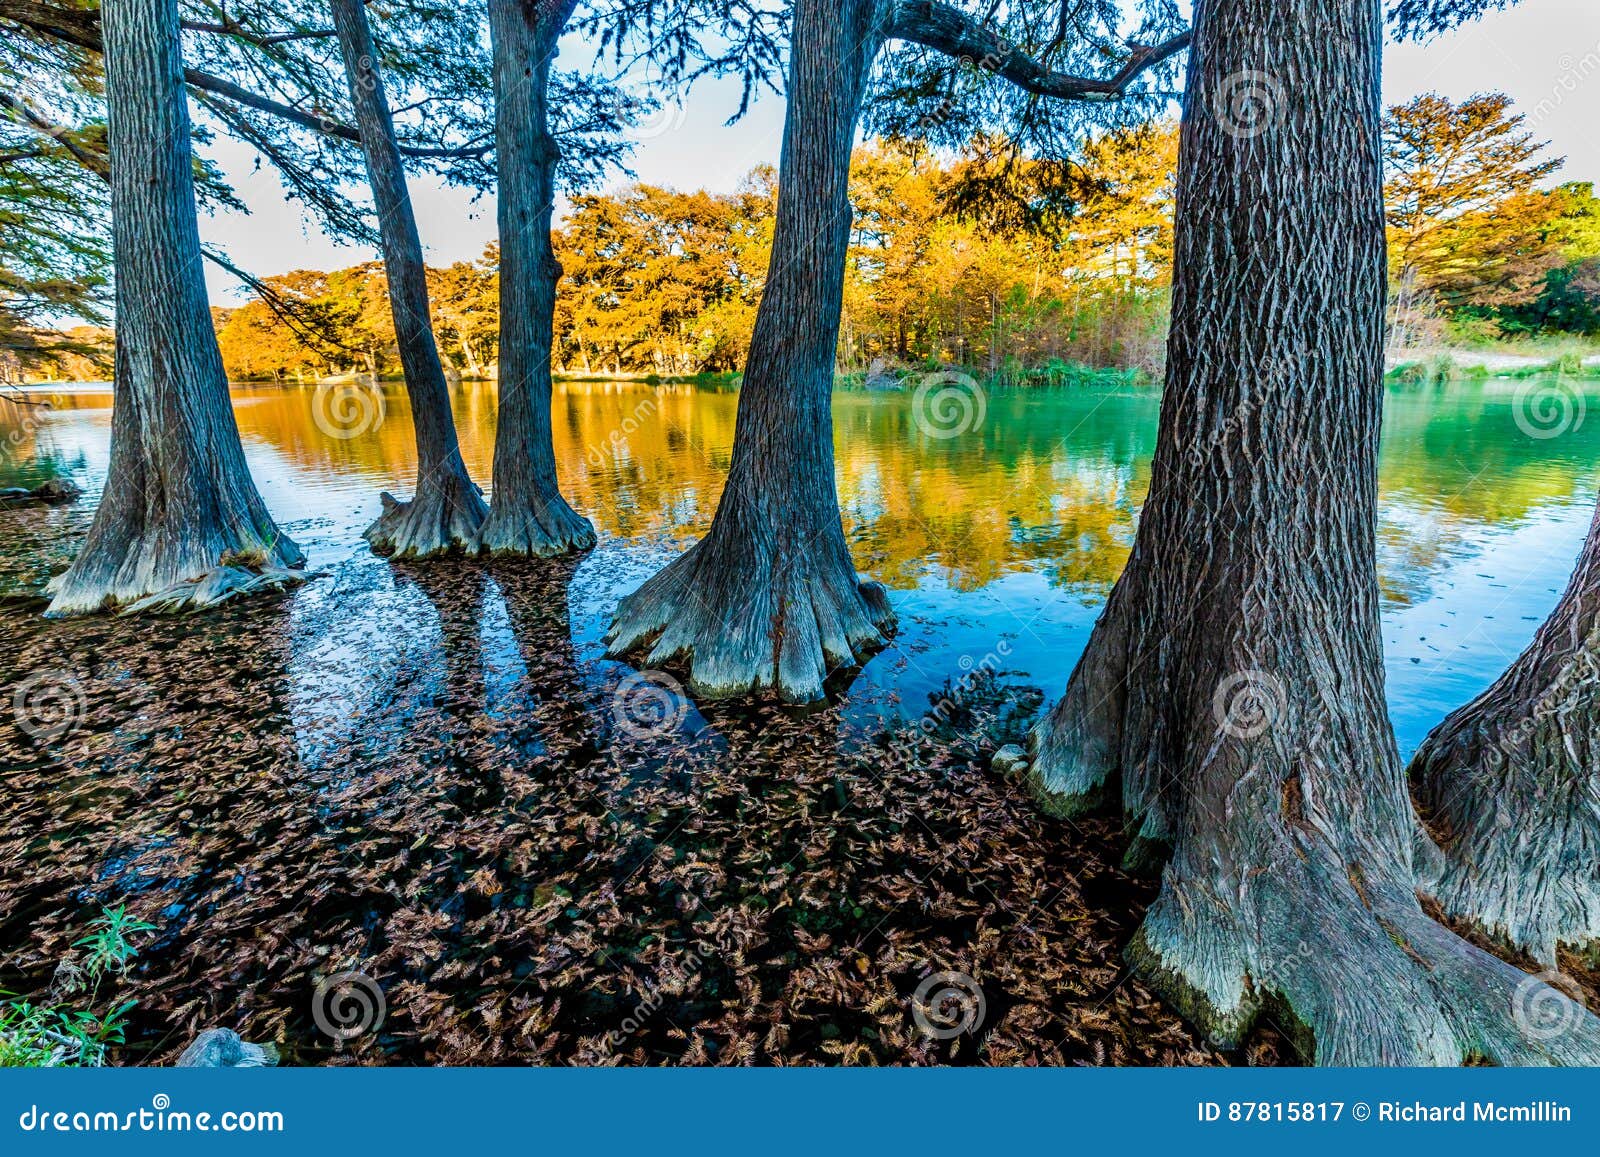 fall foliage on the crystal clear frio river in texas.